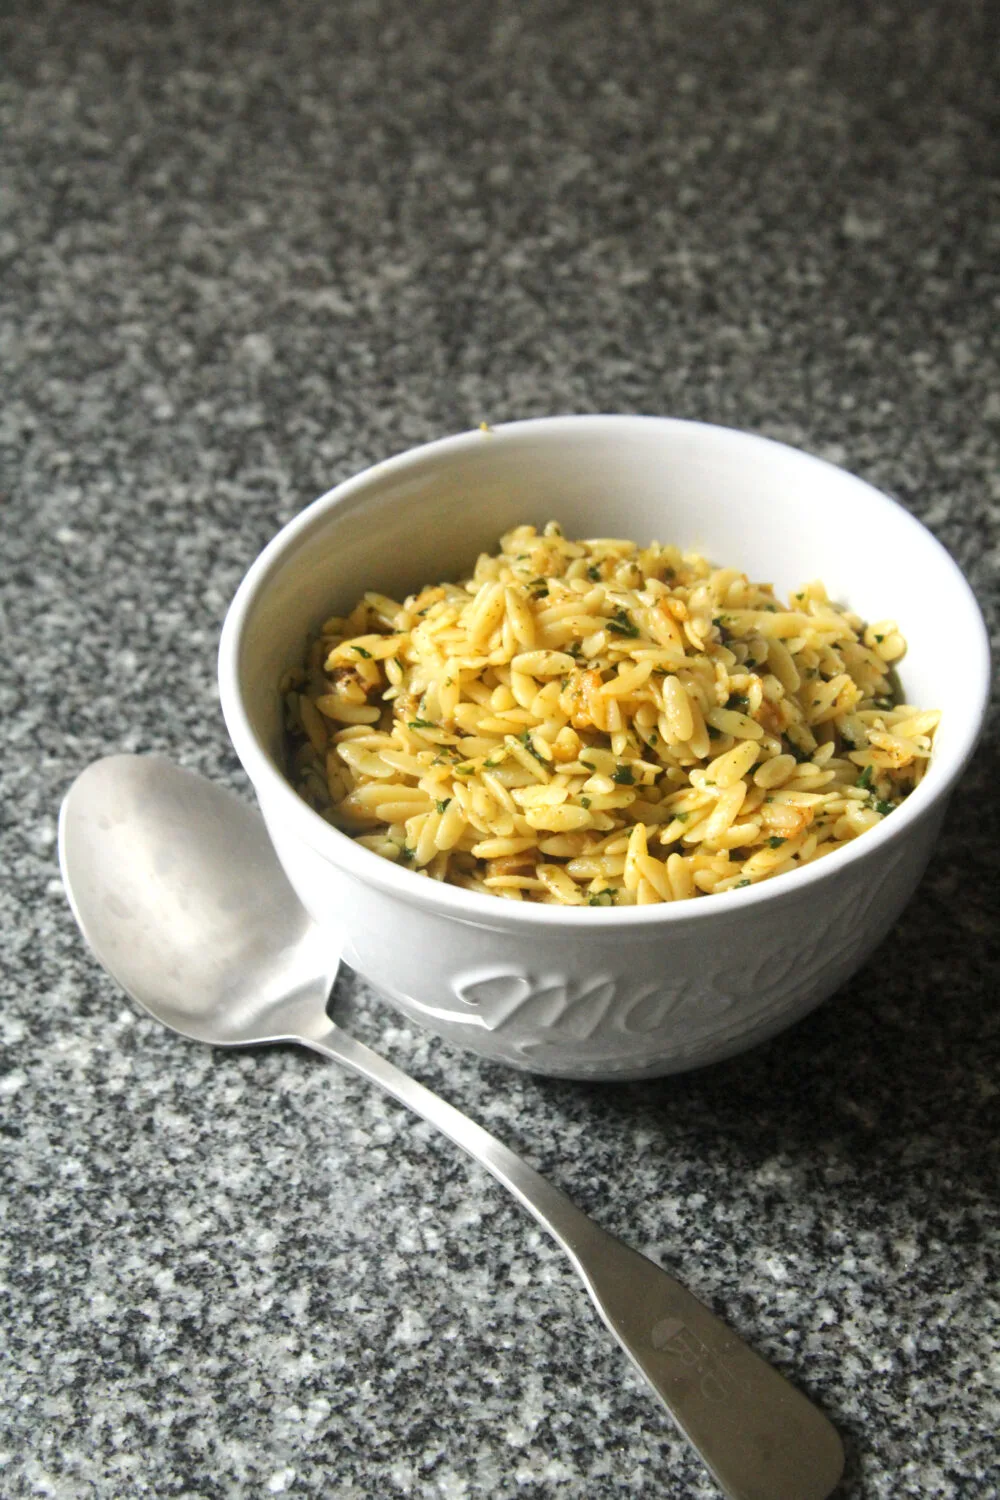 A white bowl holds yellow-ish lemon butter orzo on a granite countertop. A silver serving spoon sits nearby.